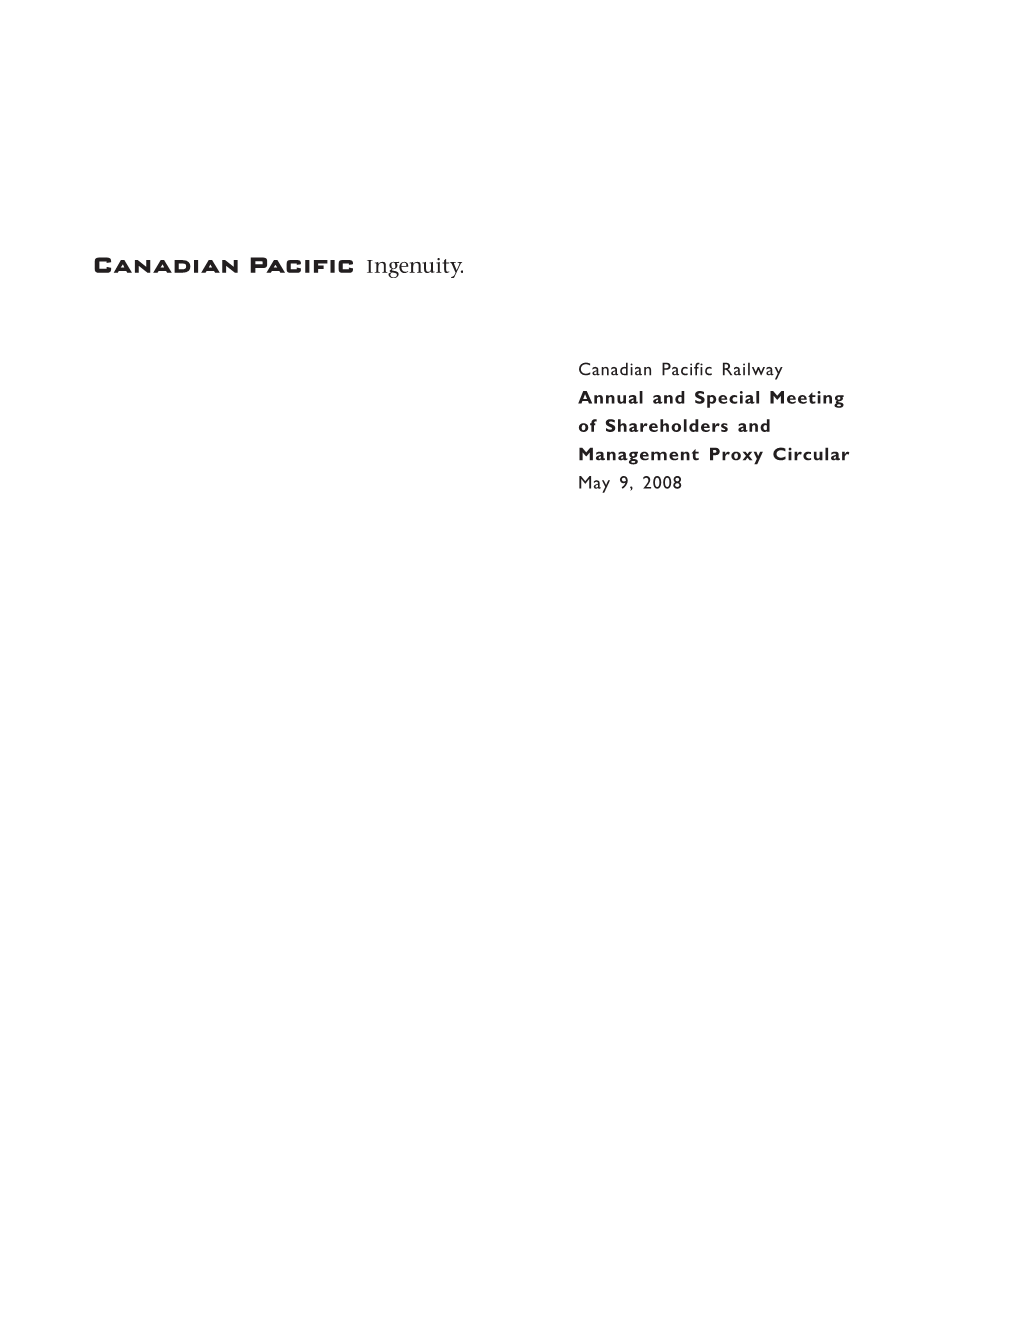 Canadian Pacific Railway Annual and Special Meeting of Shareholders and Management Proxy Circular May 9, 2008 CONTENTS